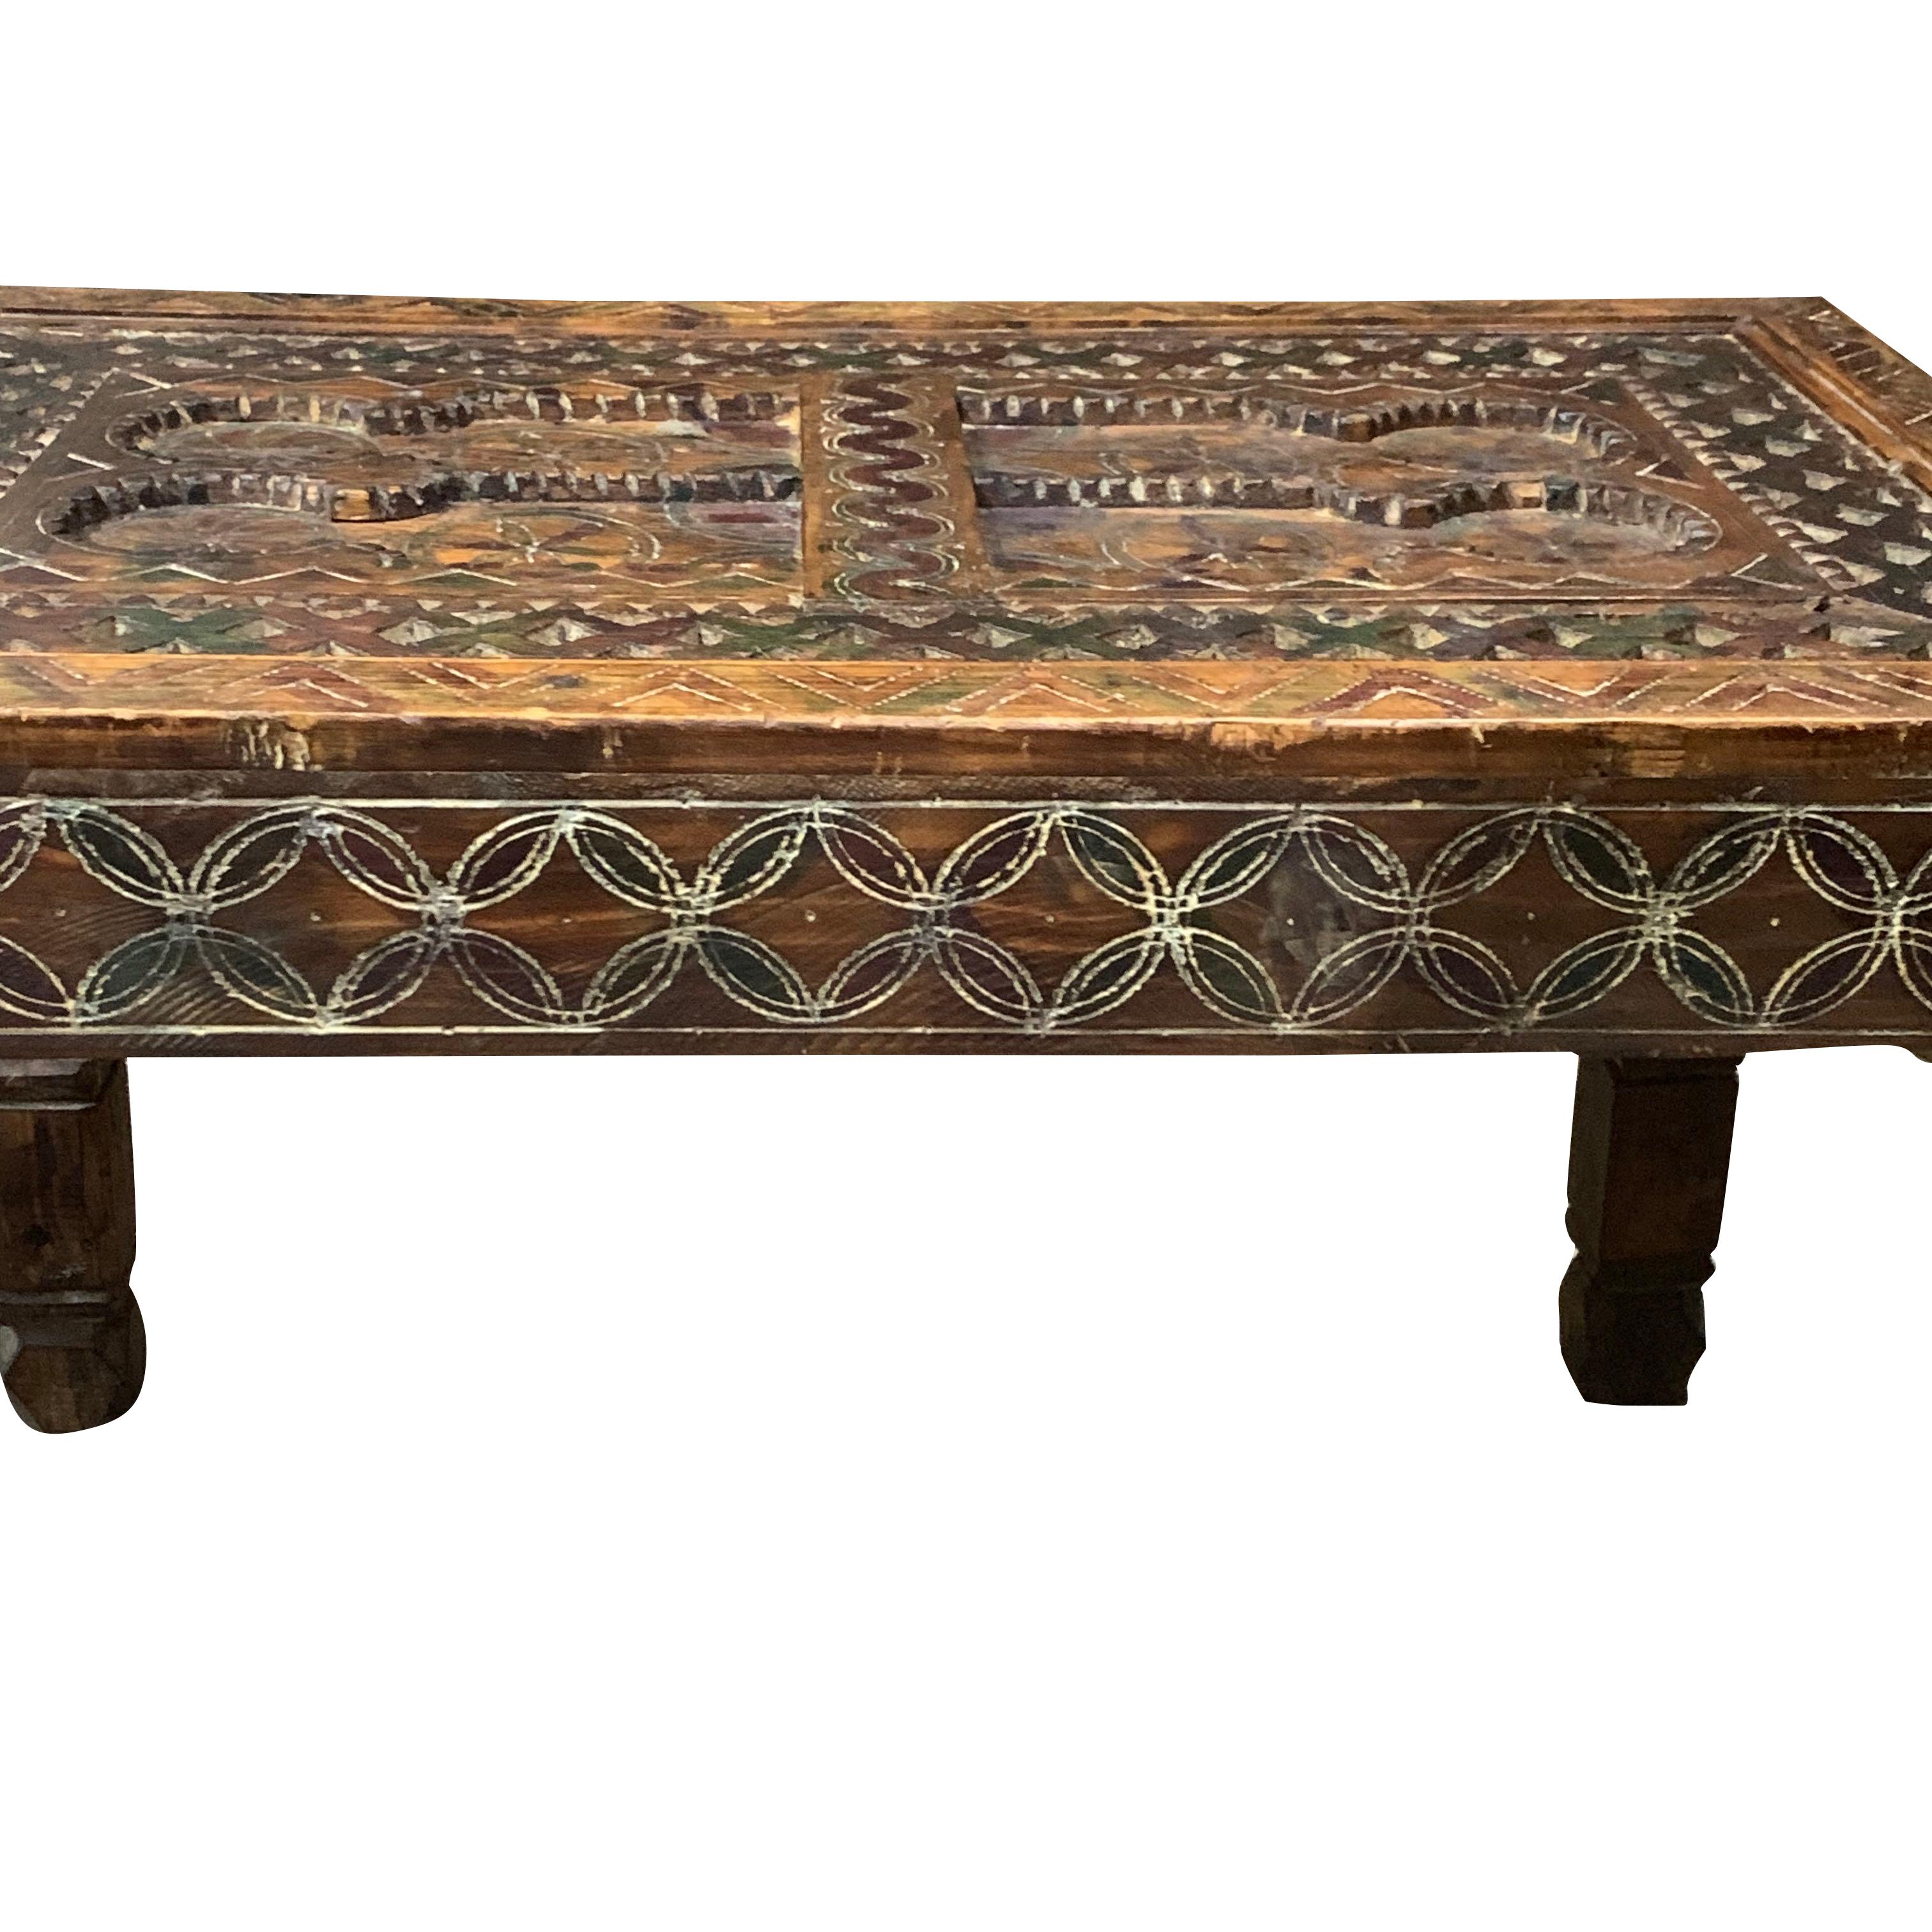 19th century rectangular coffee table from the Sahara region of Morocco.
Multicolored decorative cedar wood carved top with carved border and chevron patterned legs.
The glass top protects the detailed carvings on the top.
